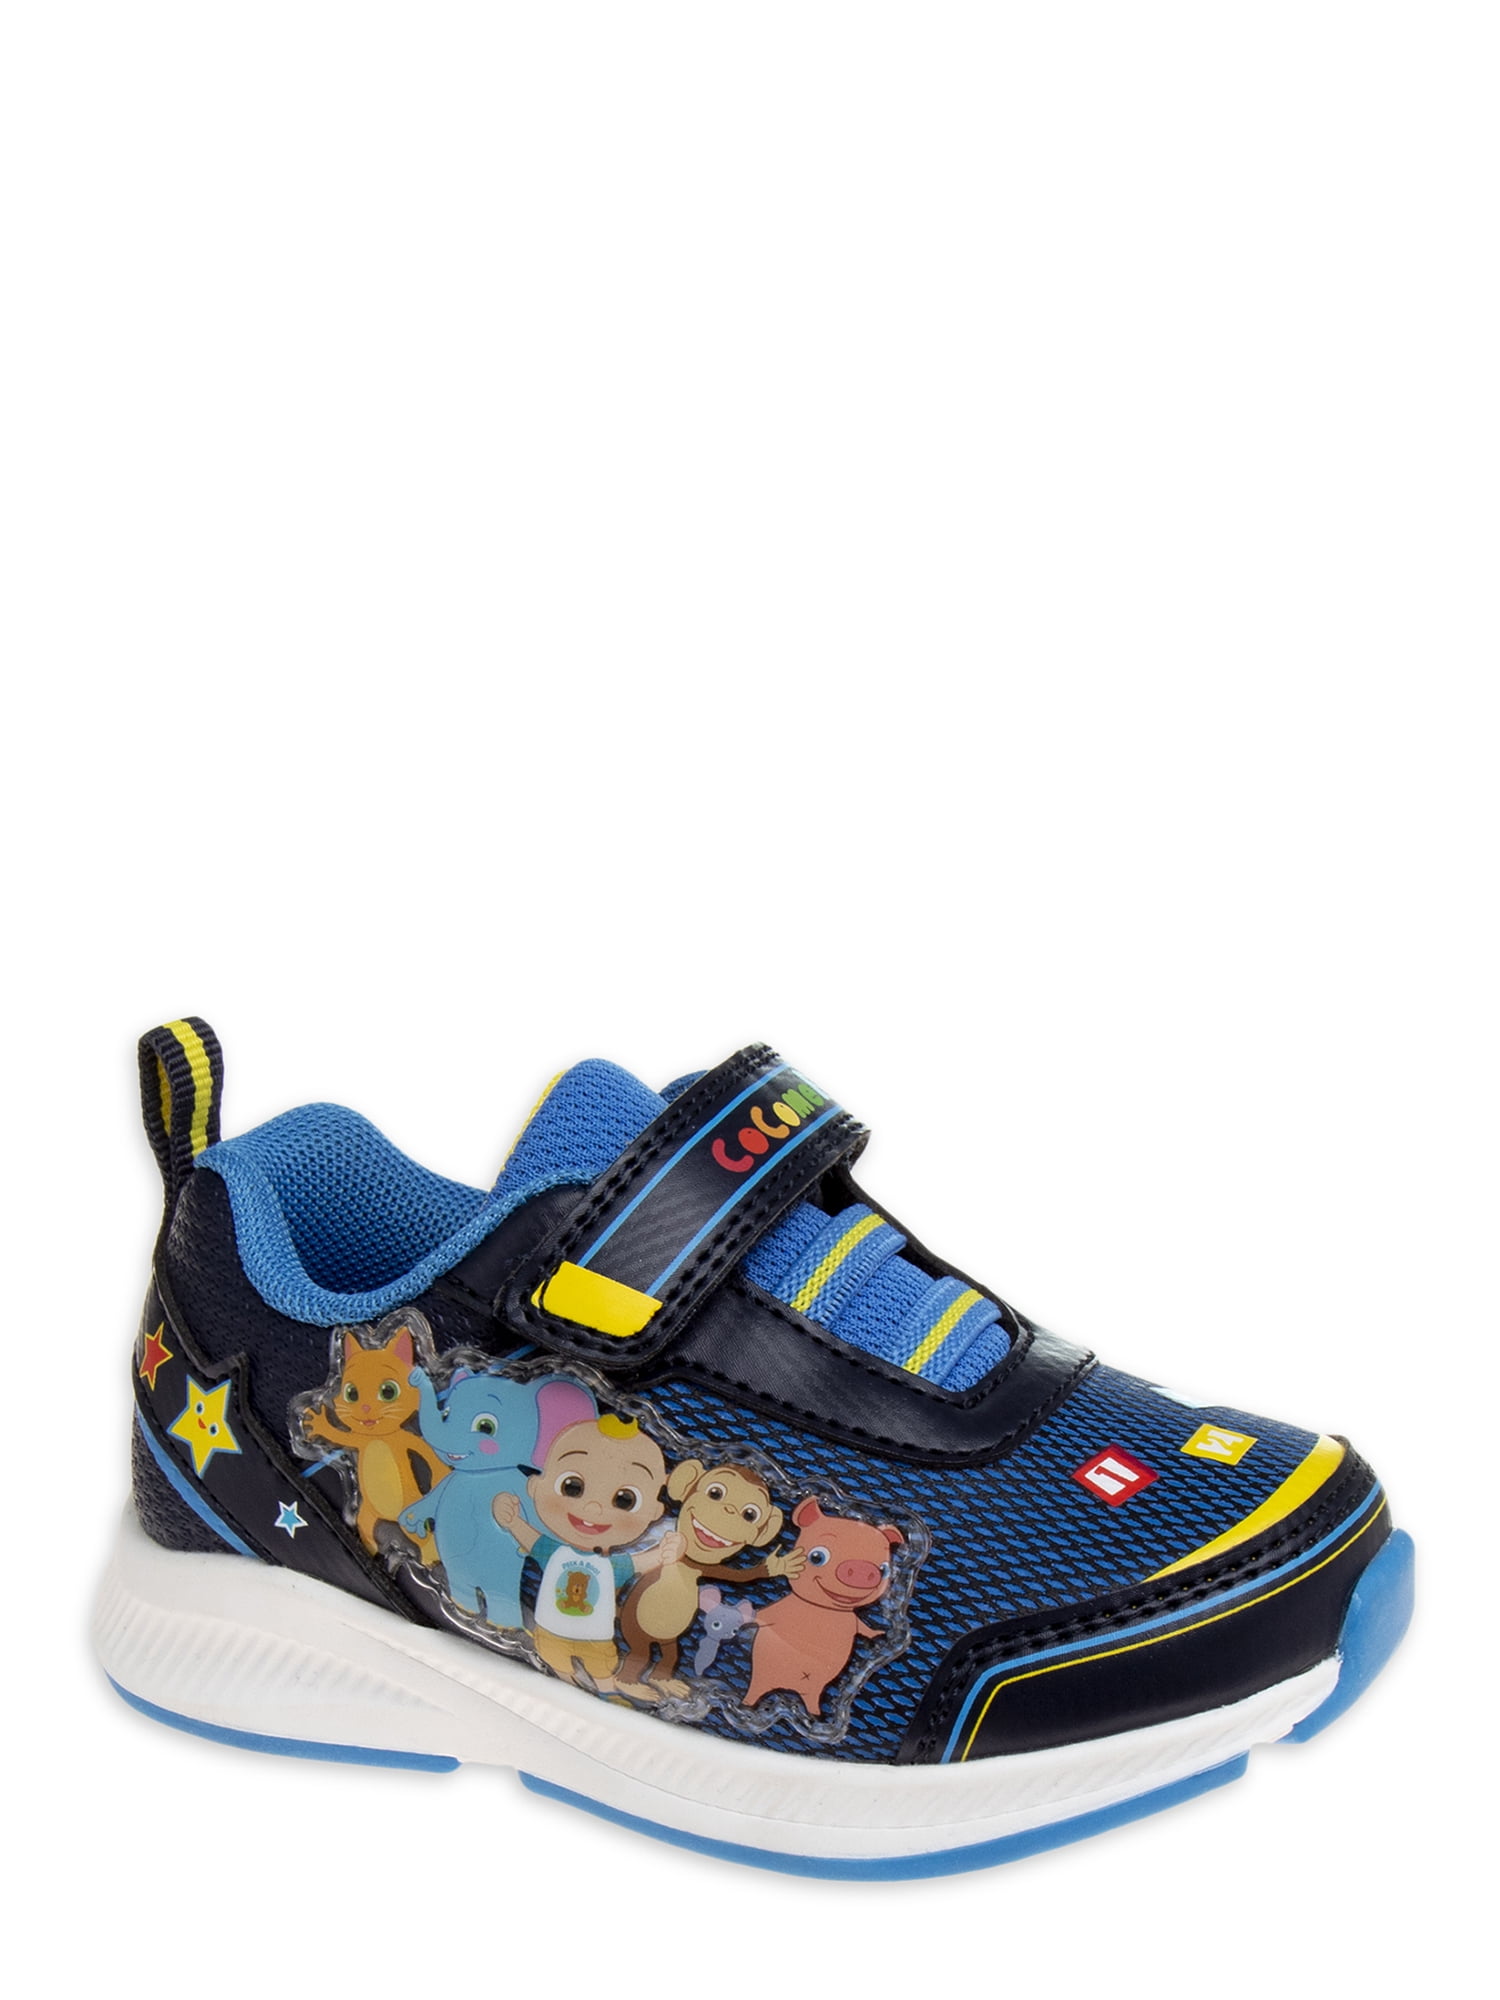 Paw Patrol Boys Diego Casual Shoes Low Top Trainers Blue UK Sizes Child 5-10 